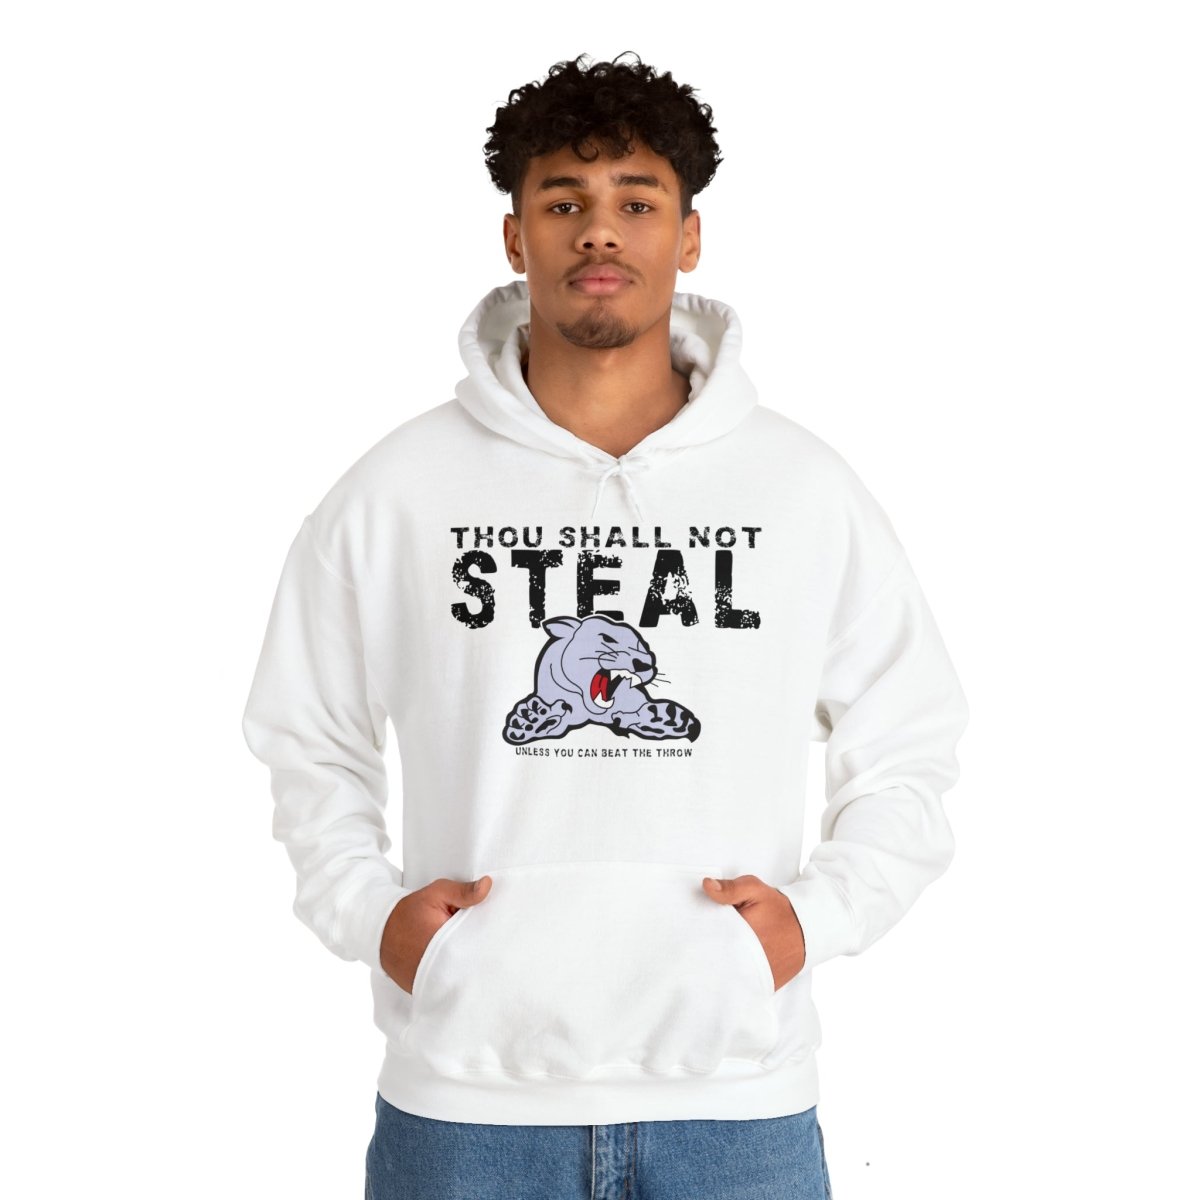 Cougar Shall Not Steal Hooded Sweatshirt